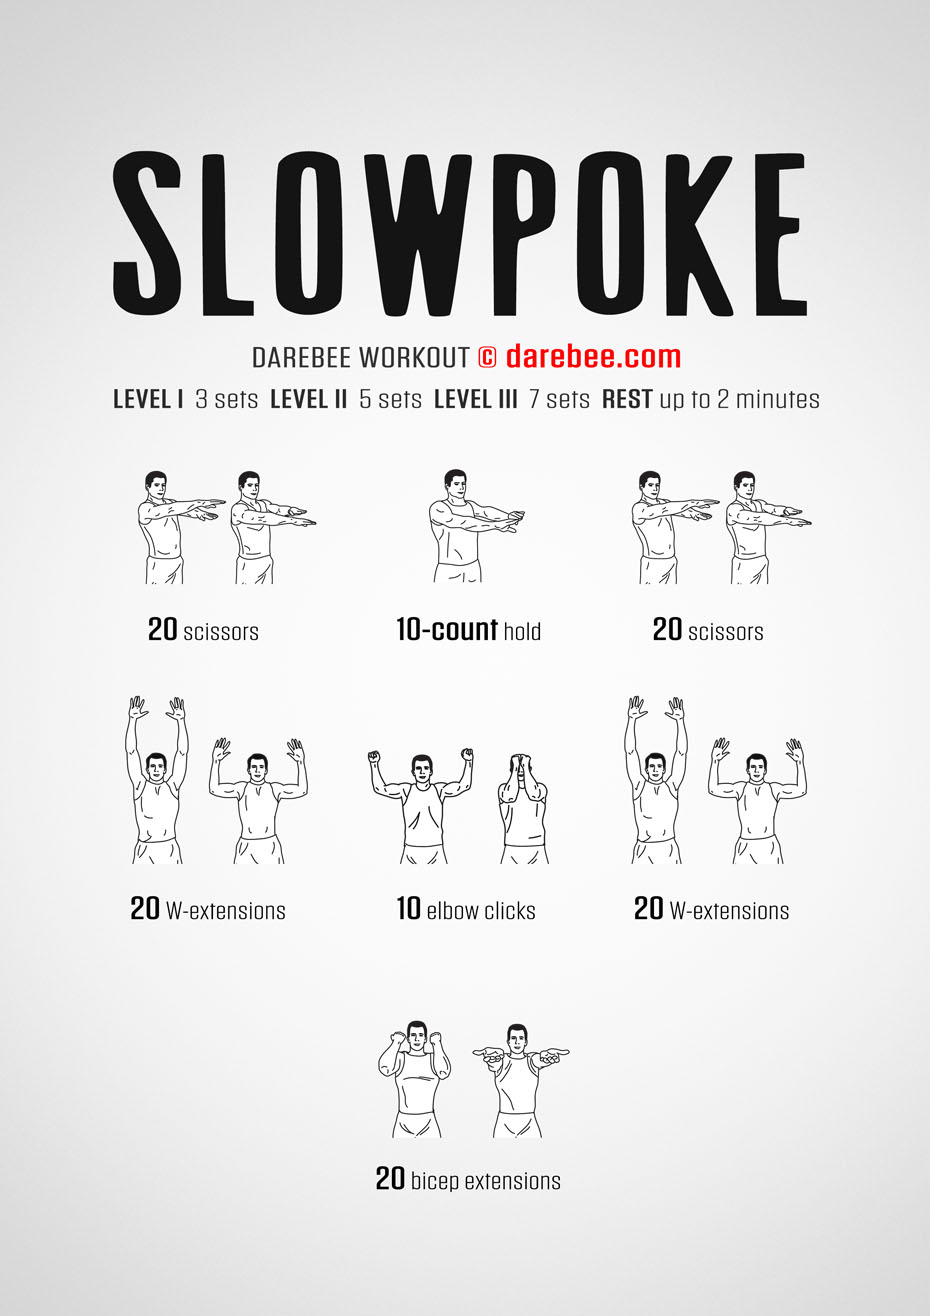 Slowpoke is a low-intensity Darebee home-fitness workout that will not exhaust you but will still get your blood flowing through your body and help bring your body temperature up.